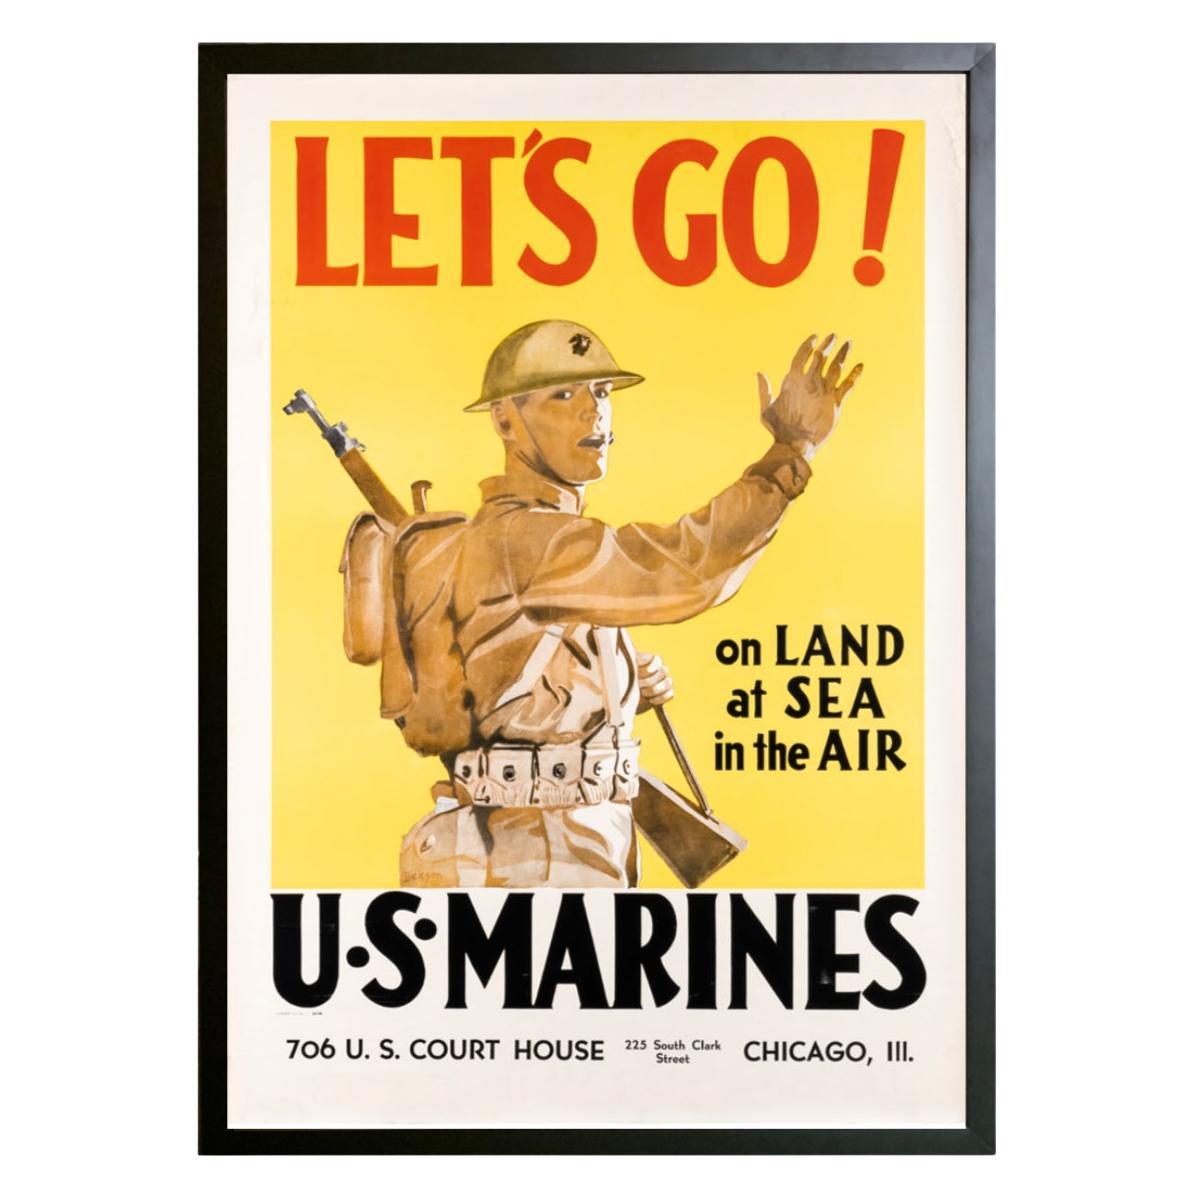 "Let's Go". U.S. Marines" Vintage WWII Recruitment Poster by Dickson, 1941 en vente